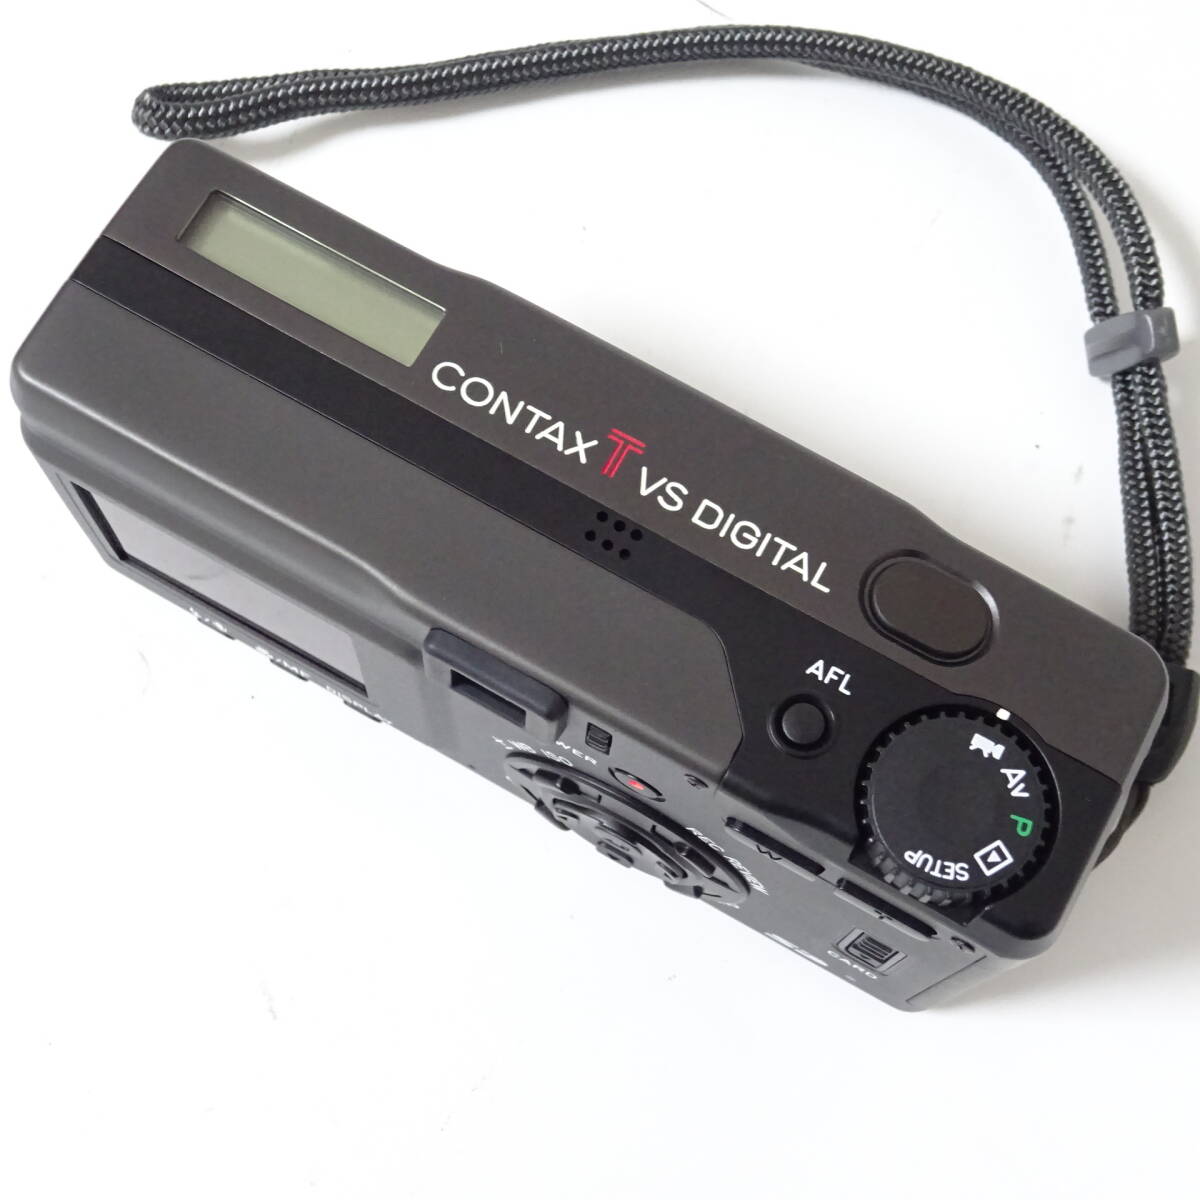 CONTAX Contax T VS DIGITAL compact film camera operation not yet verification 60 size shipping K-2620181-209-mrrz